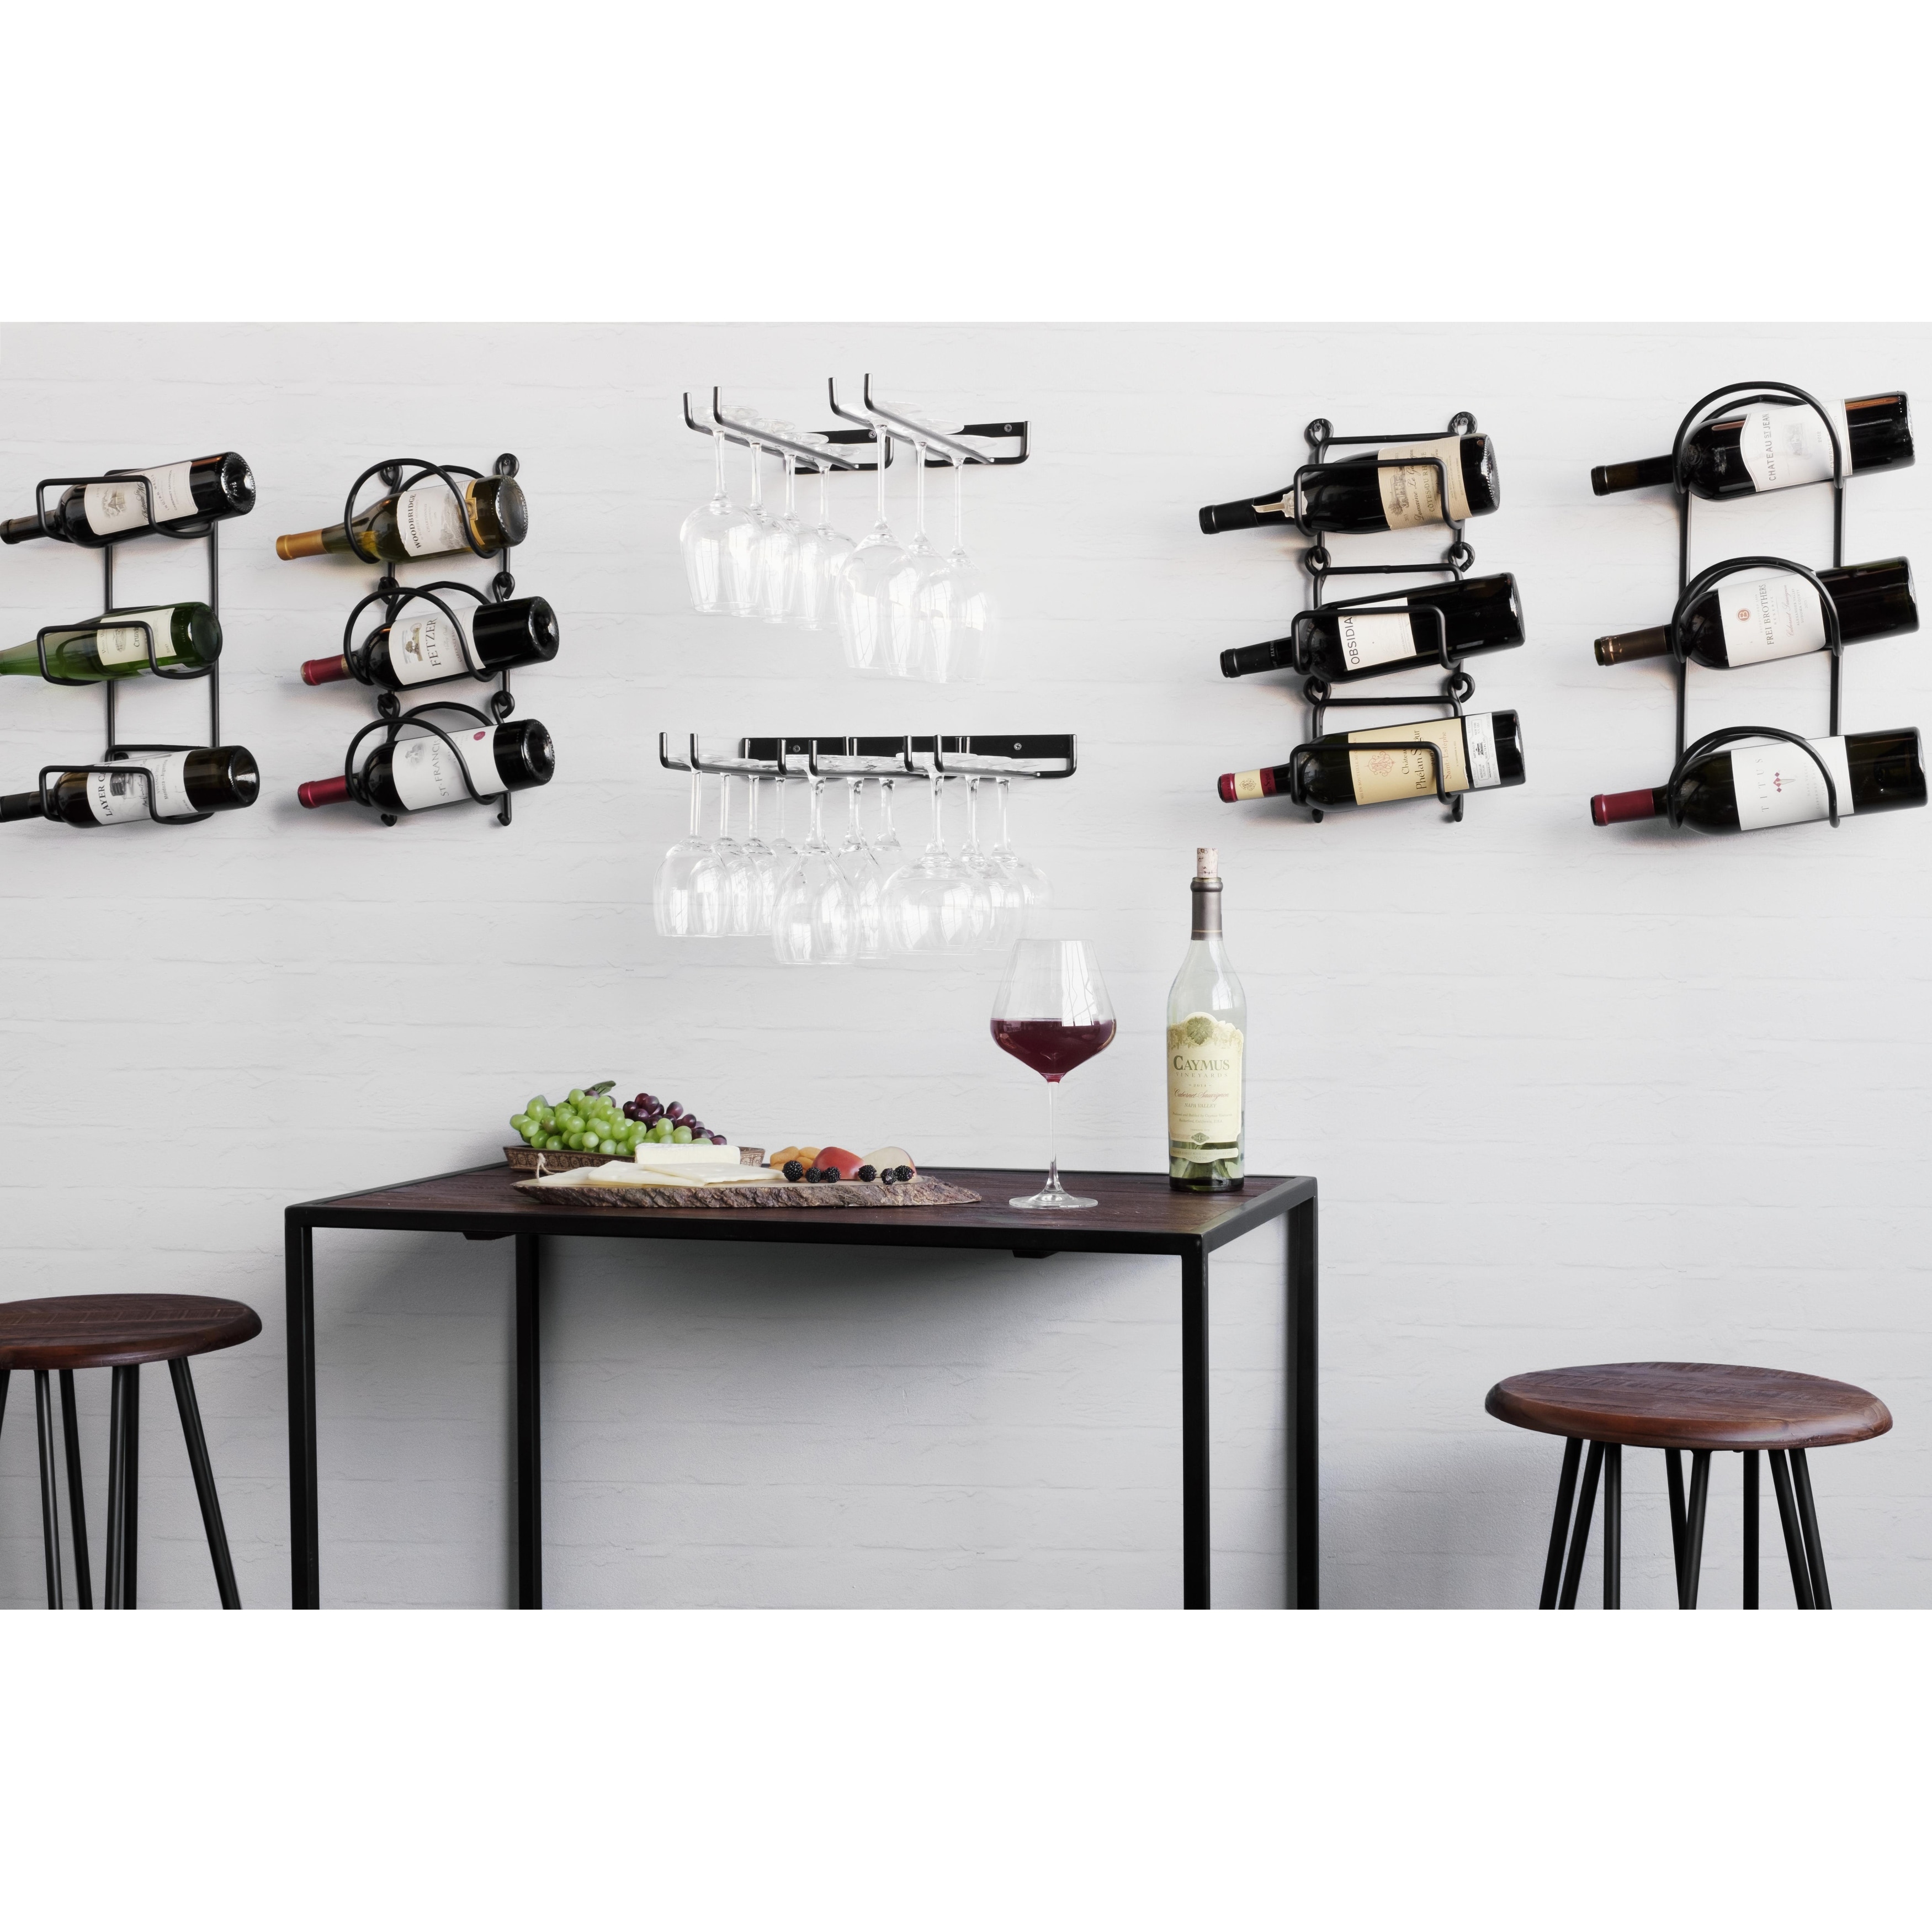 https://ak1.ostkcdn.com/images/products/is/images/direct/210ca0e3cb91dbca23730737dd5b33892500121c/Wallniture-Moduwine-Wall-Mount-Towel-Rack-for-Bathroom-Wall-Decor%2C-3-Sectional-%28Set-of-2%29.jpg